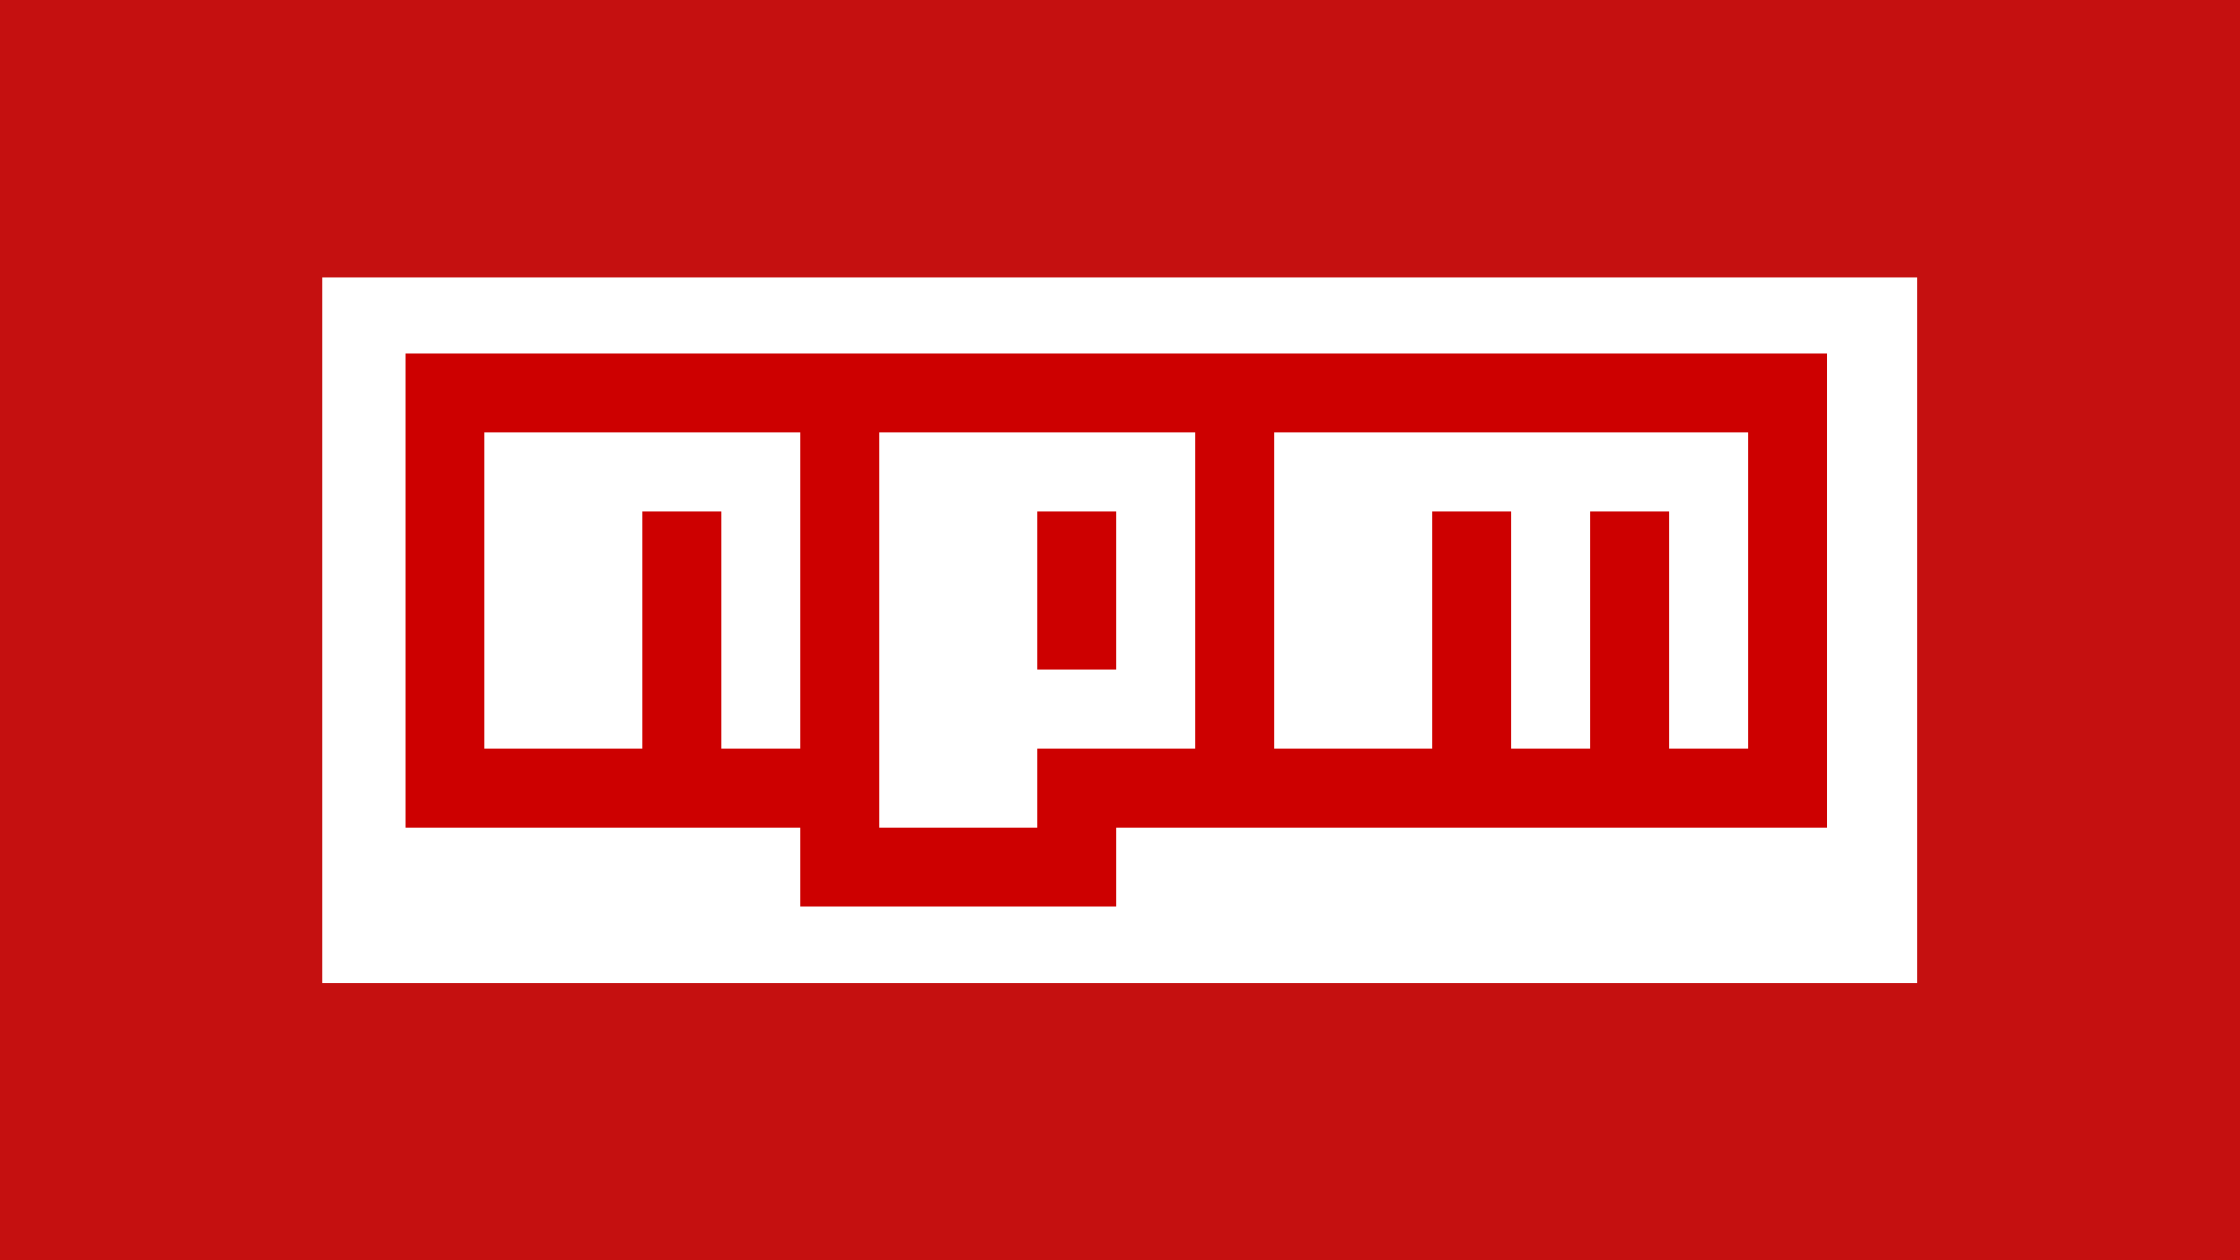 How To Protect Your Npm From The Iconburst Campaign